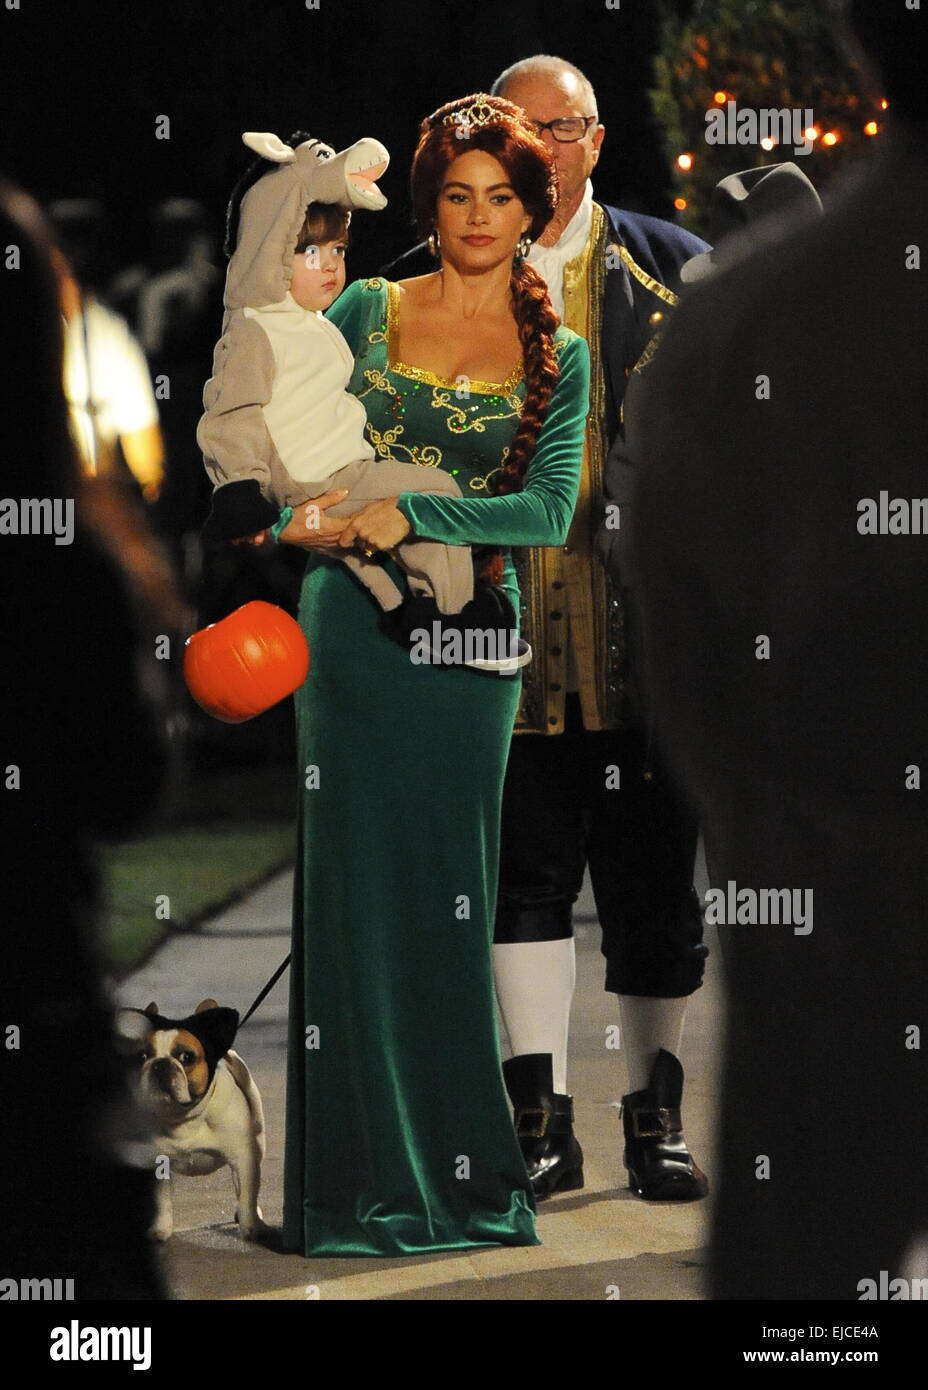 Sofia Vergara wears a Princess Fiona from Shrek costume on the set of  "Modern Family" filming a halloween episode. The actress was joined by co  star Ed O'Neil who was Benjamin Franklin